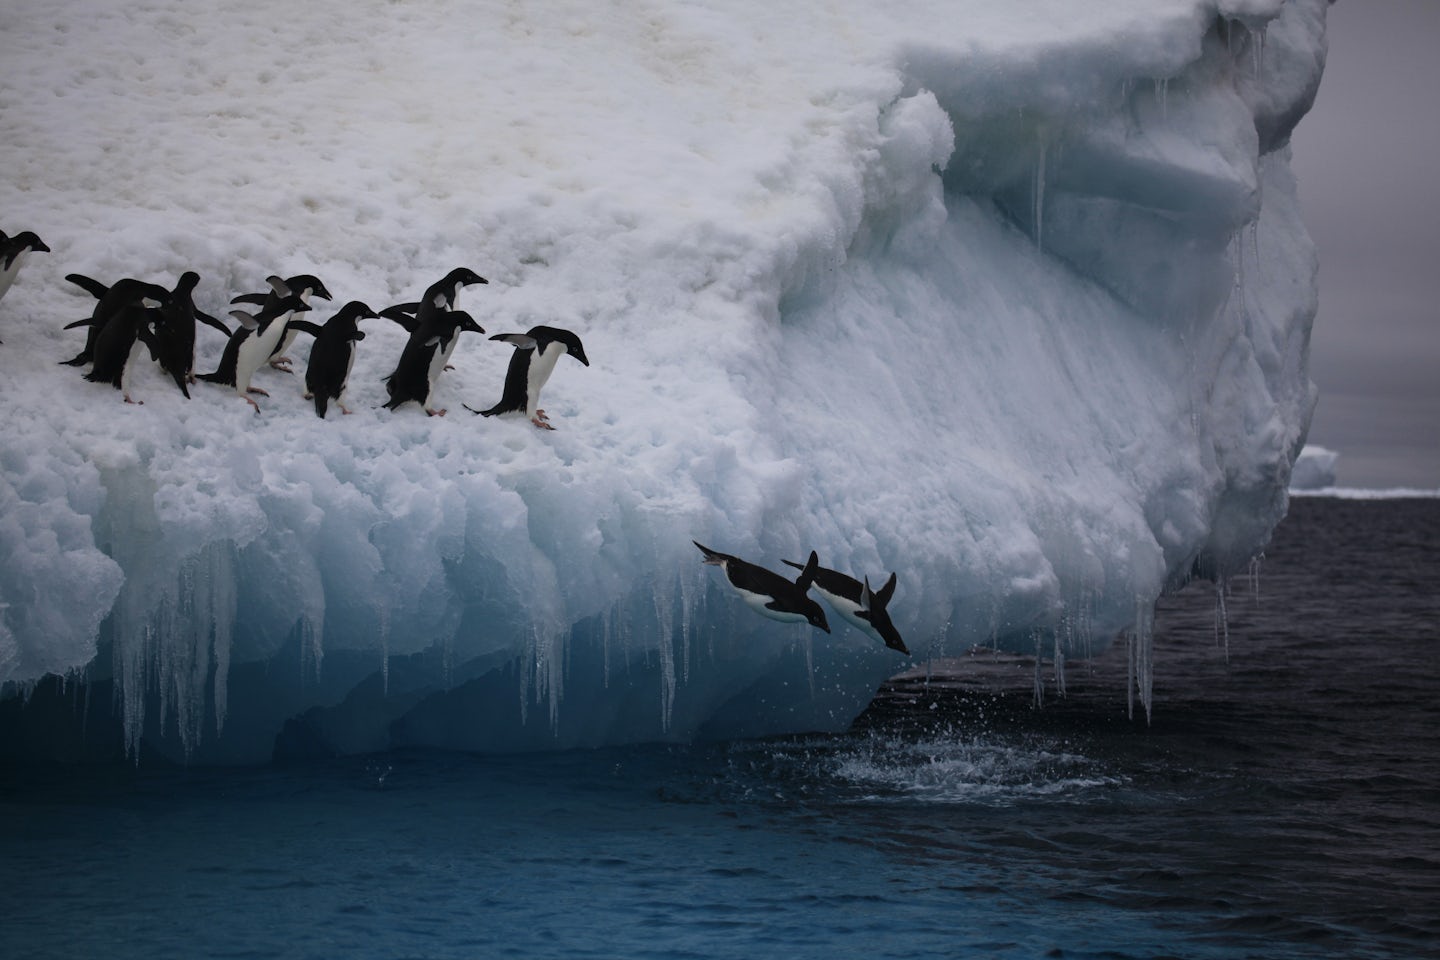 penguins diving into water